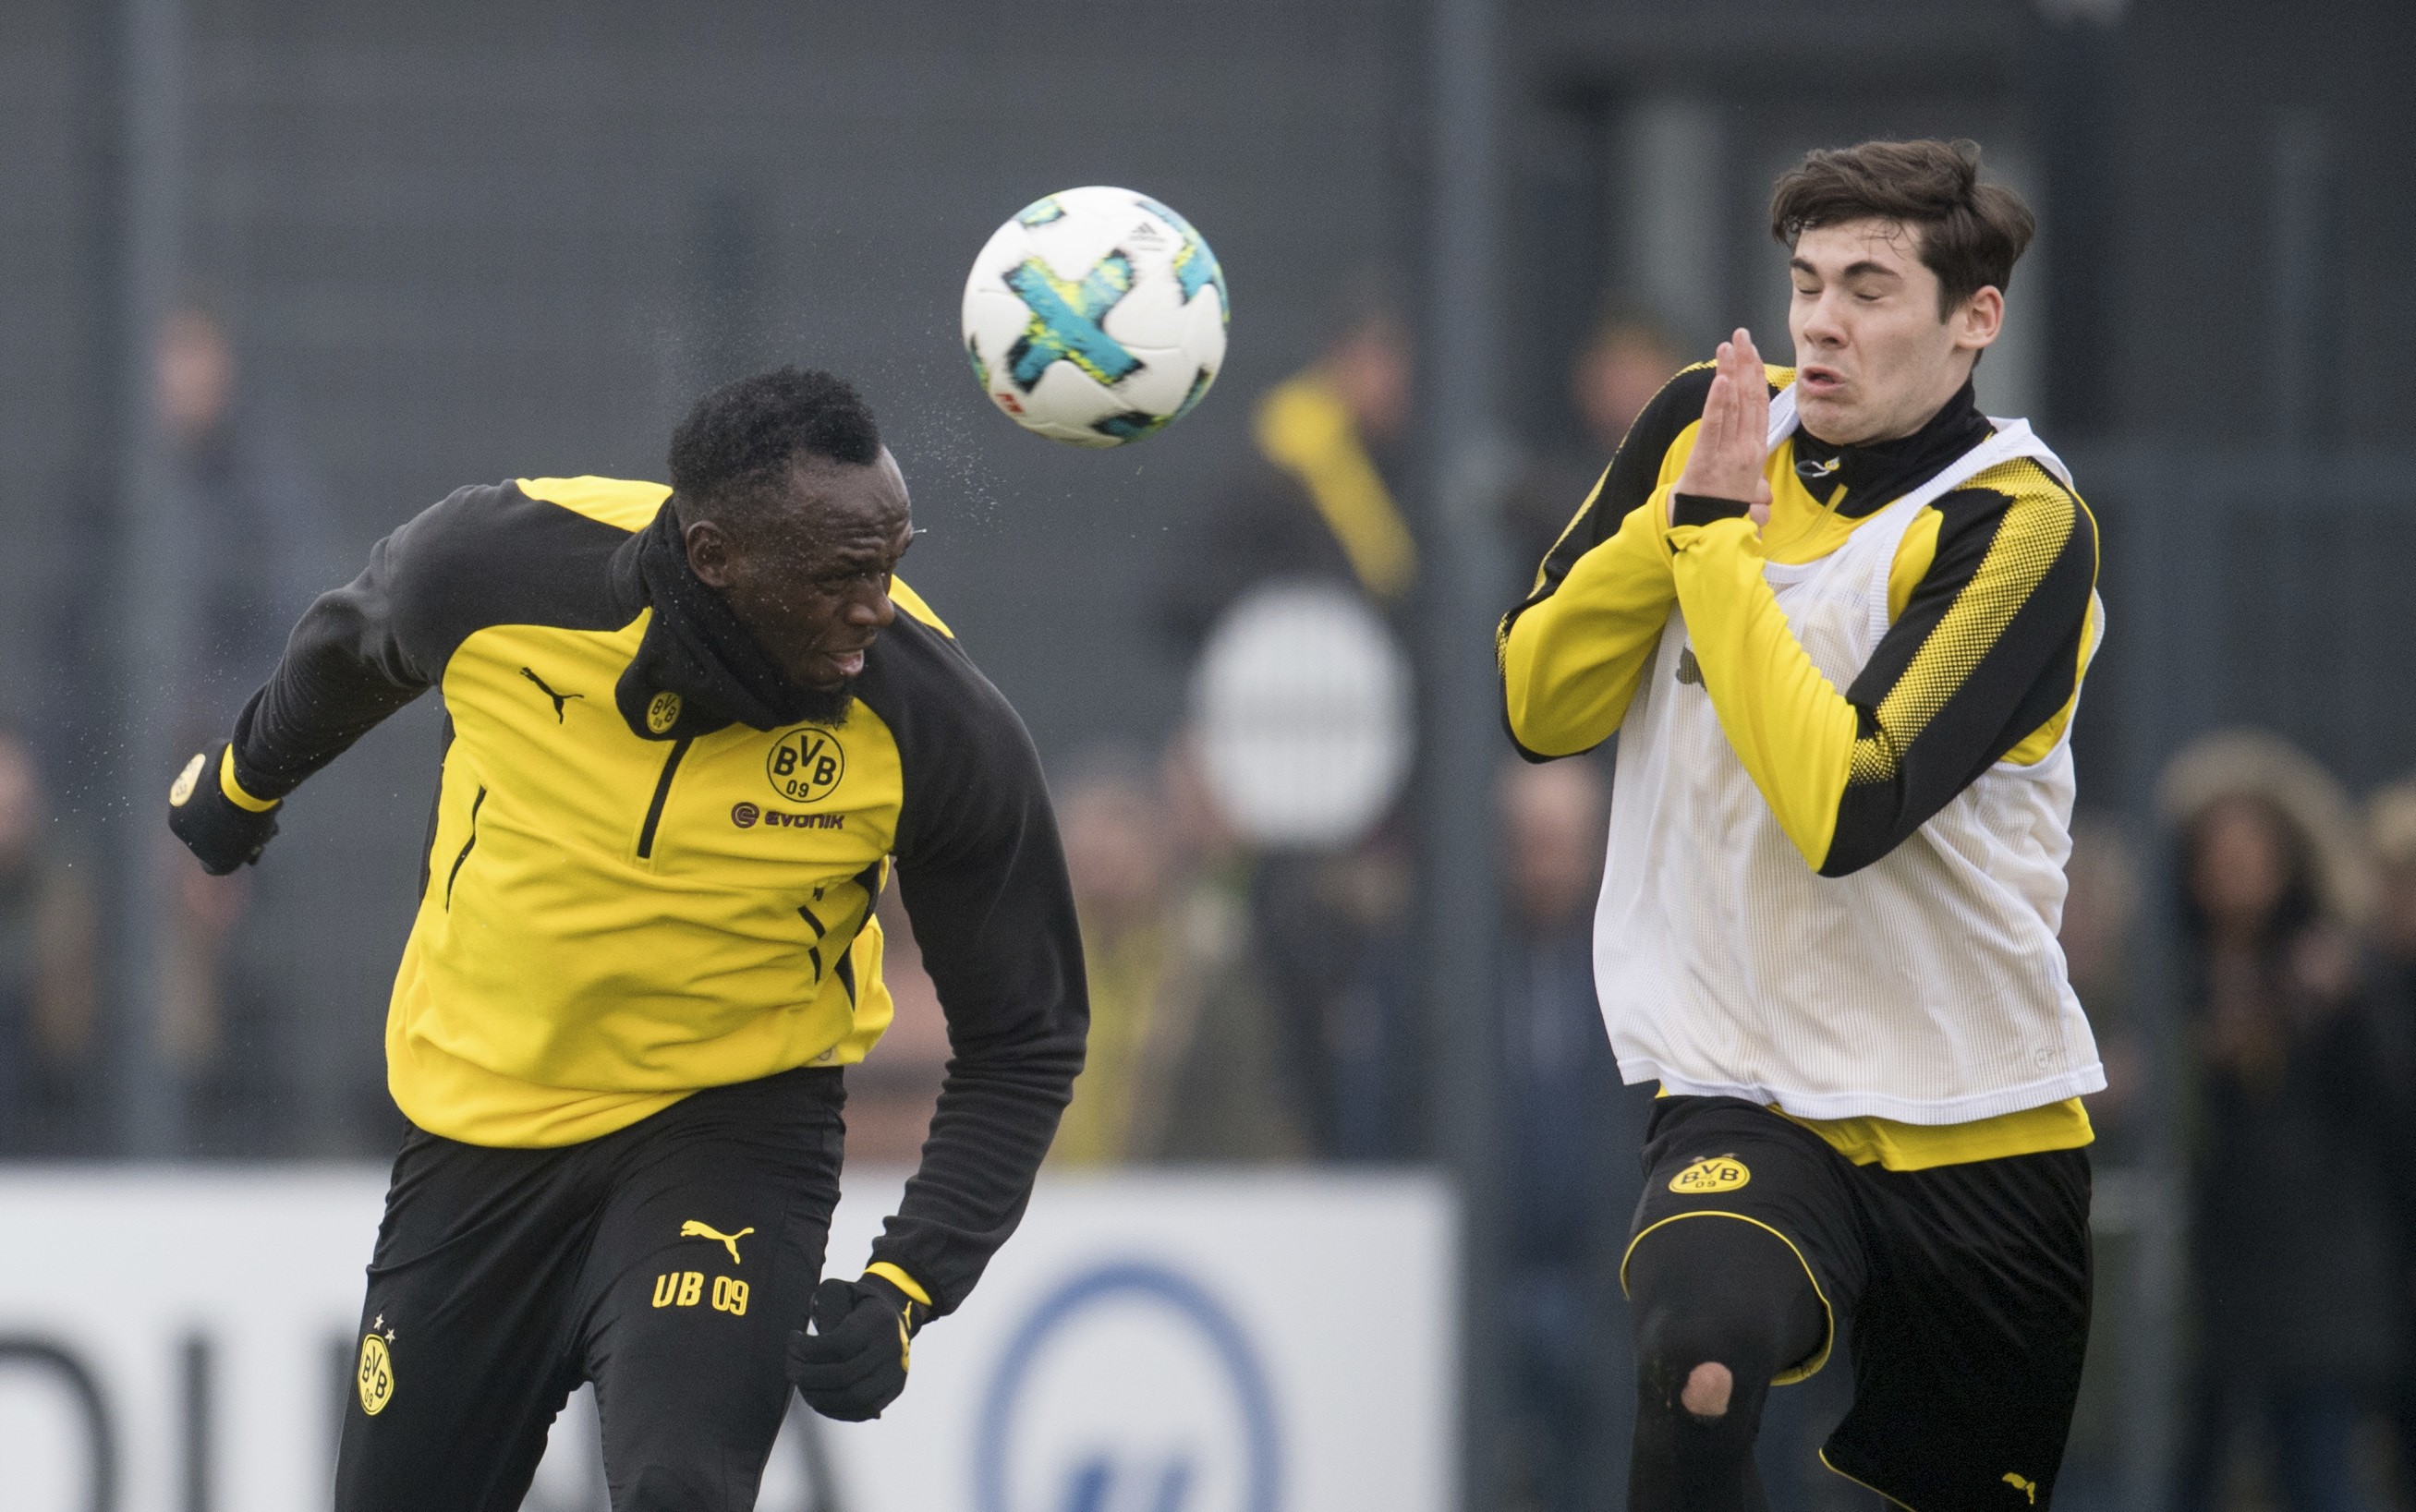 Jamaica’s former sprinter Usain Bolt heads the ball during a practice session with the Borussia Dortmund soccer squad. Photo: AP